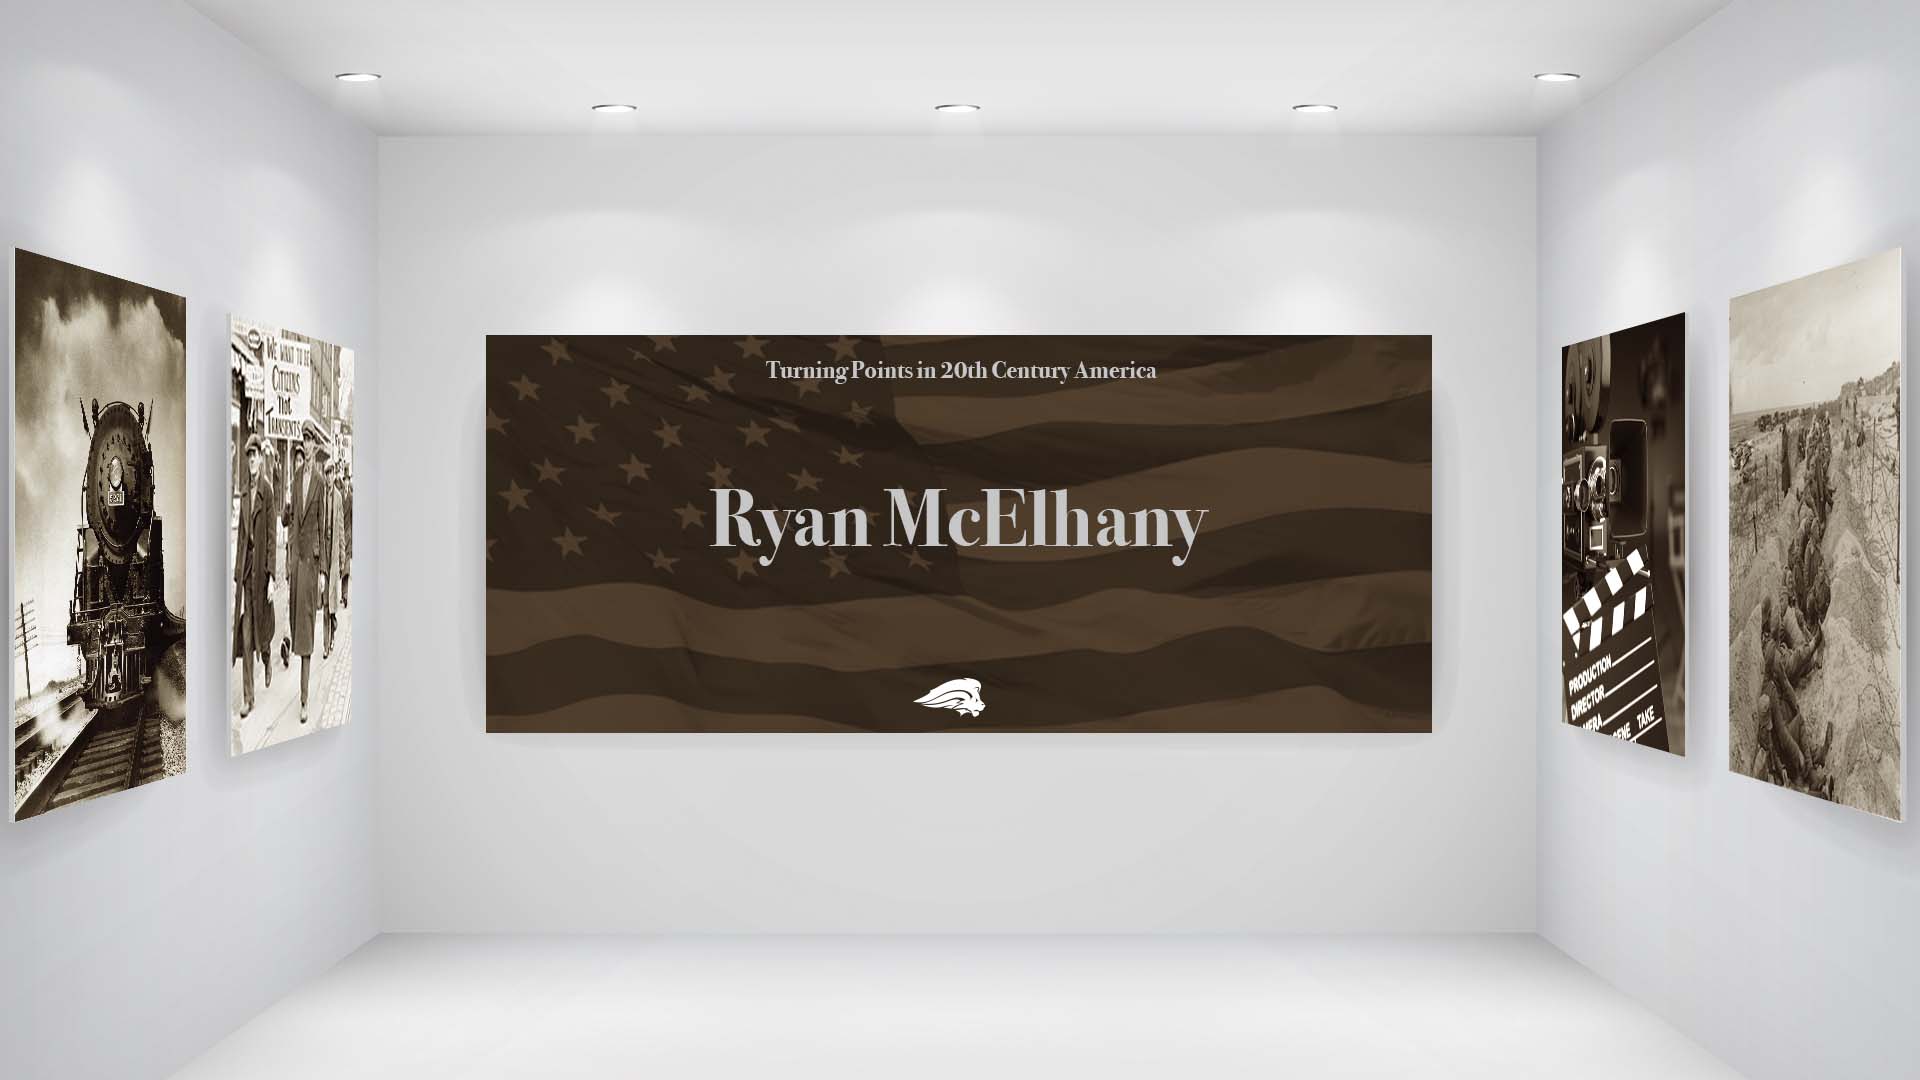 Ryan McElhany, MBA, explains the evolution of marketing, advertising and advertising law in the 1900s and how they were turning points in the 20th century.